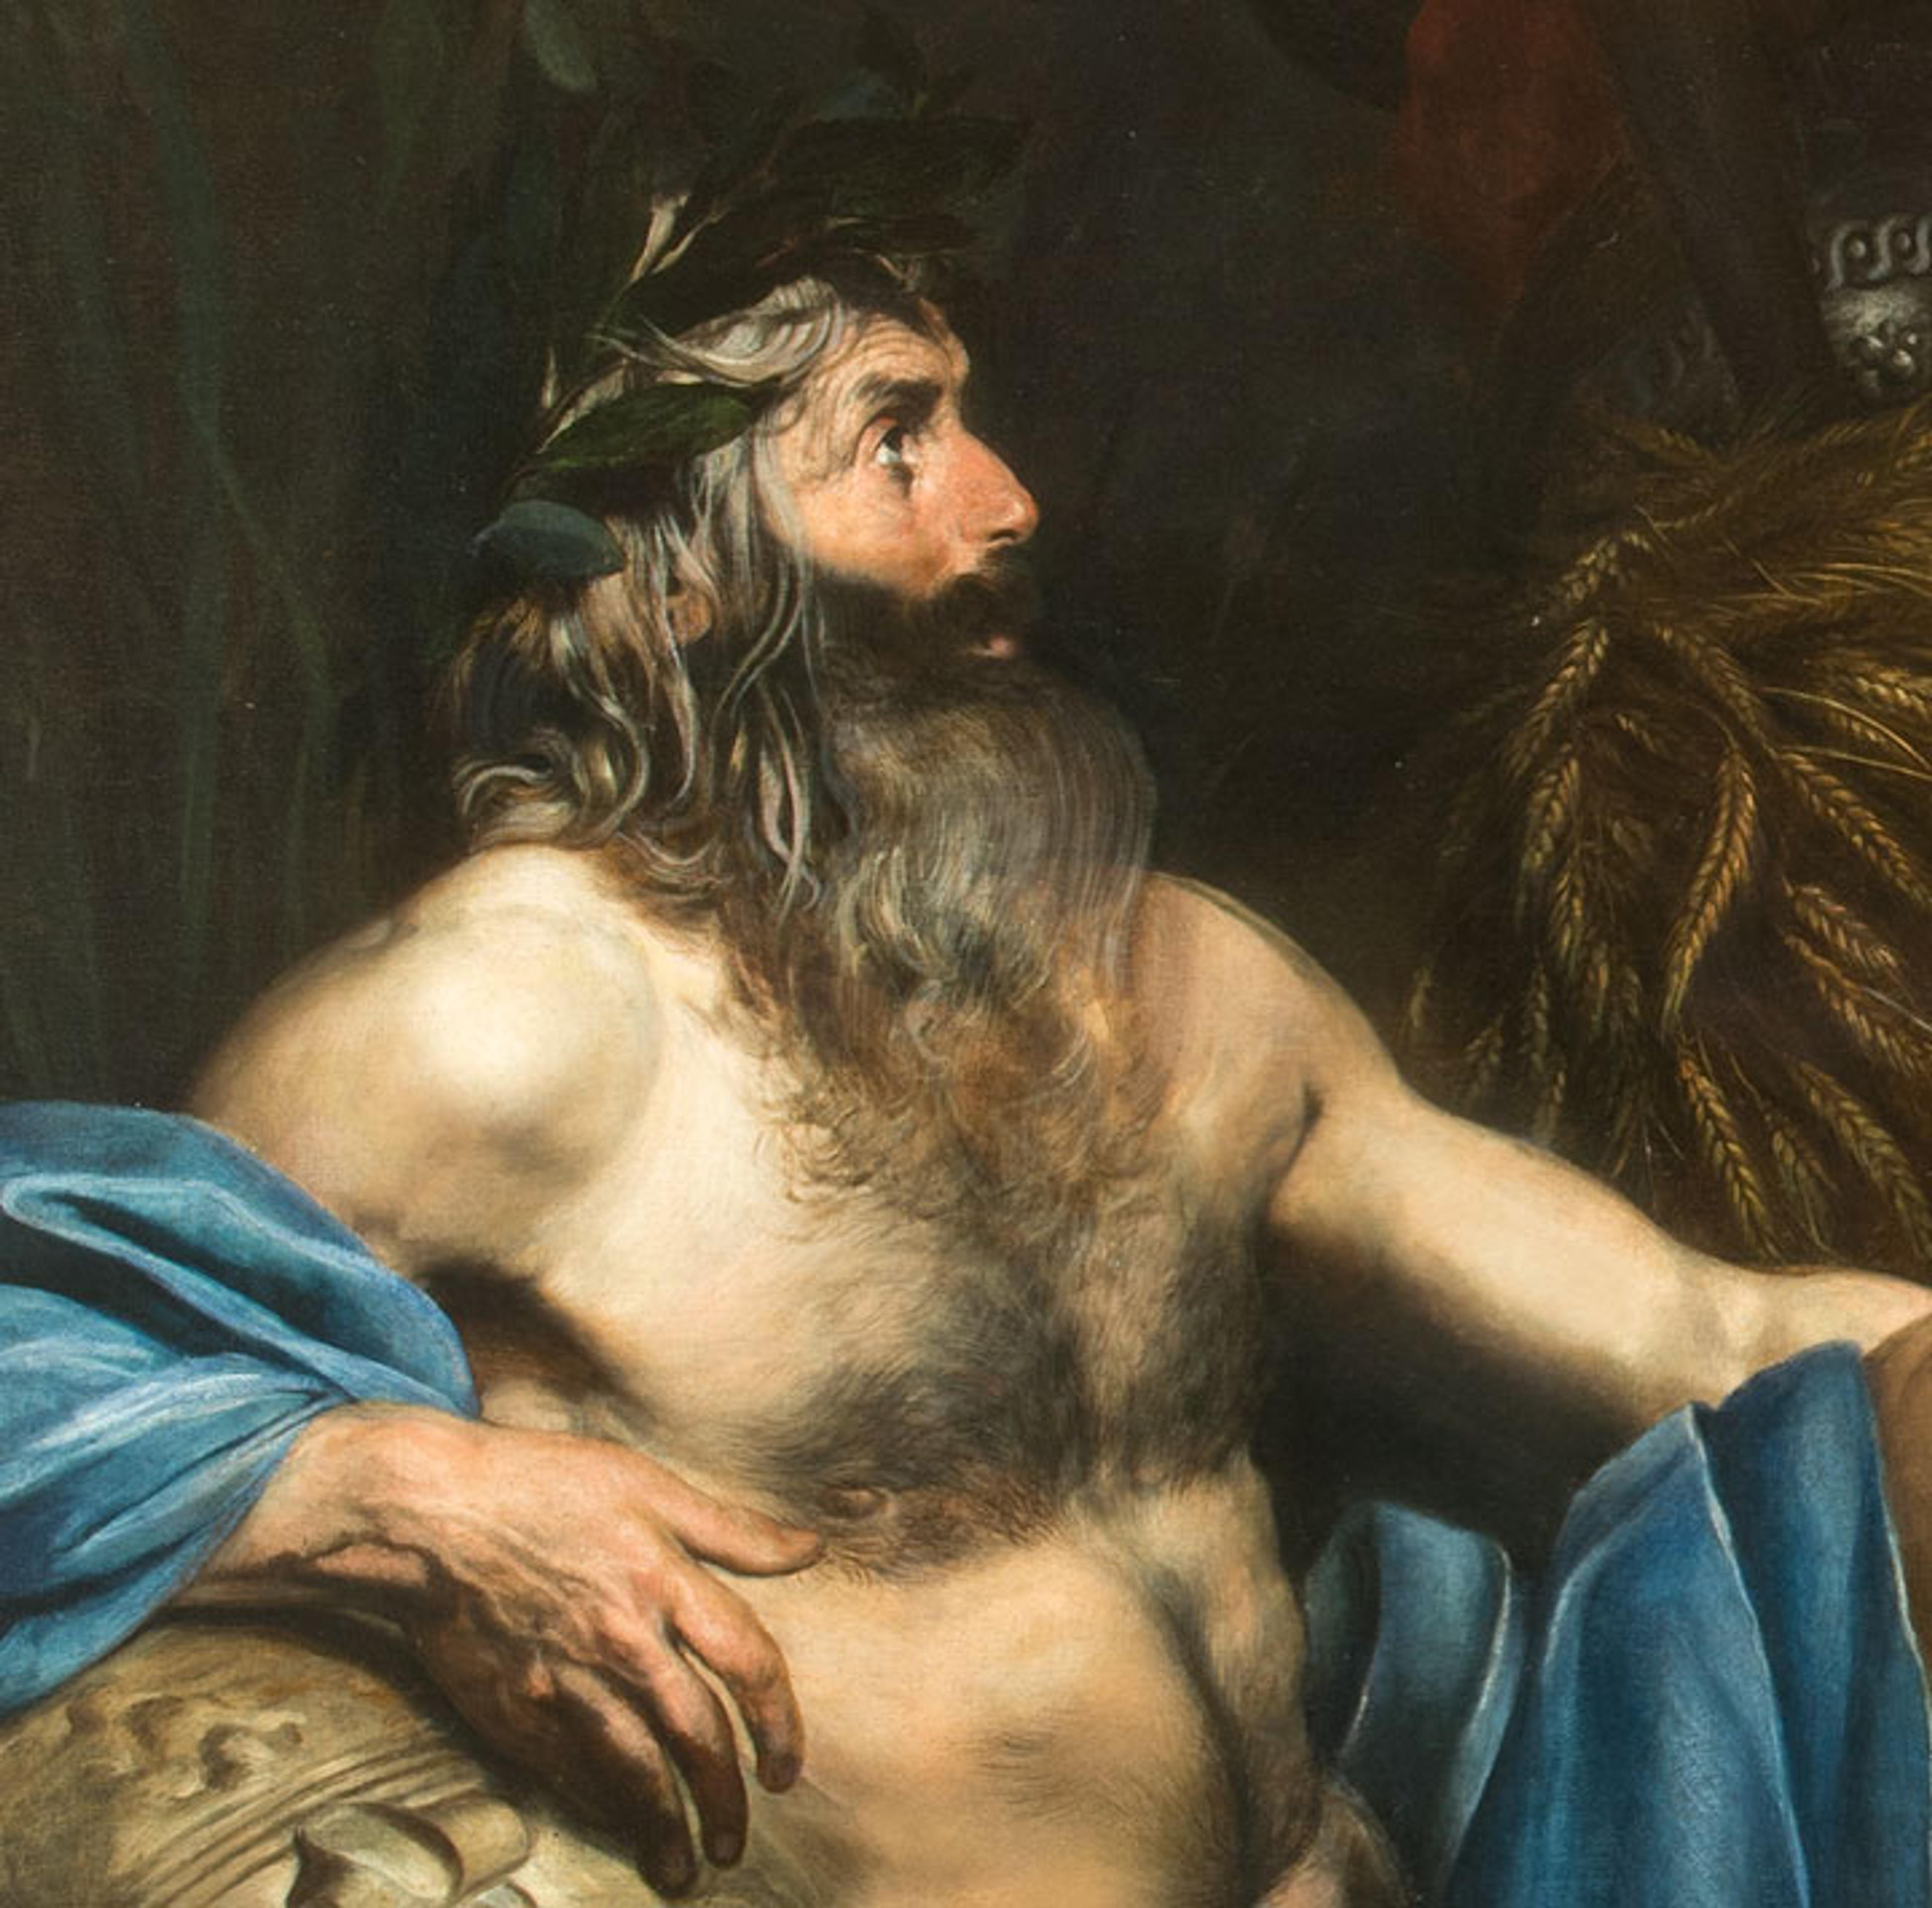 Detail view of a painting by Valentin de Boulogne showing a nude, bearded, middle-aged man in profile 